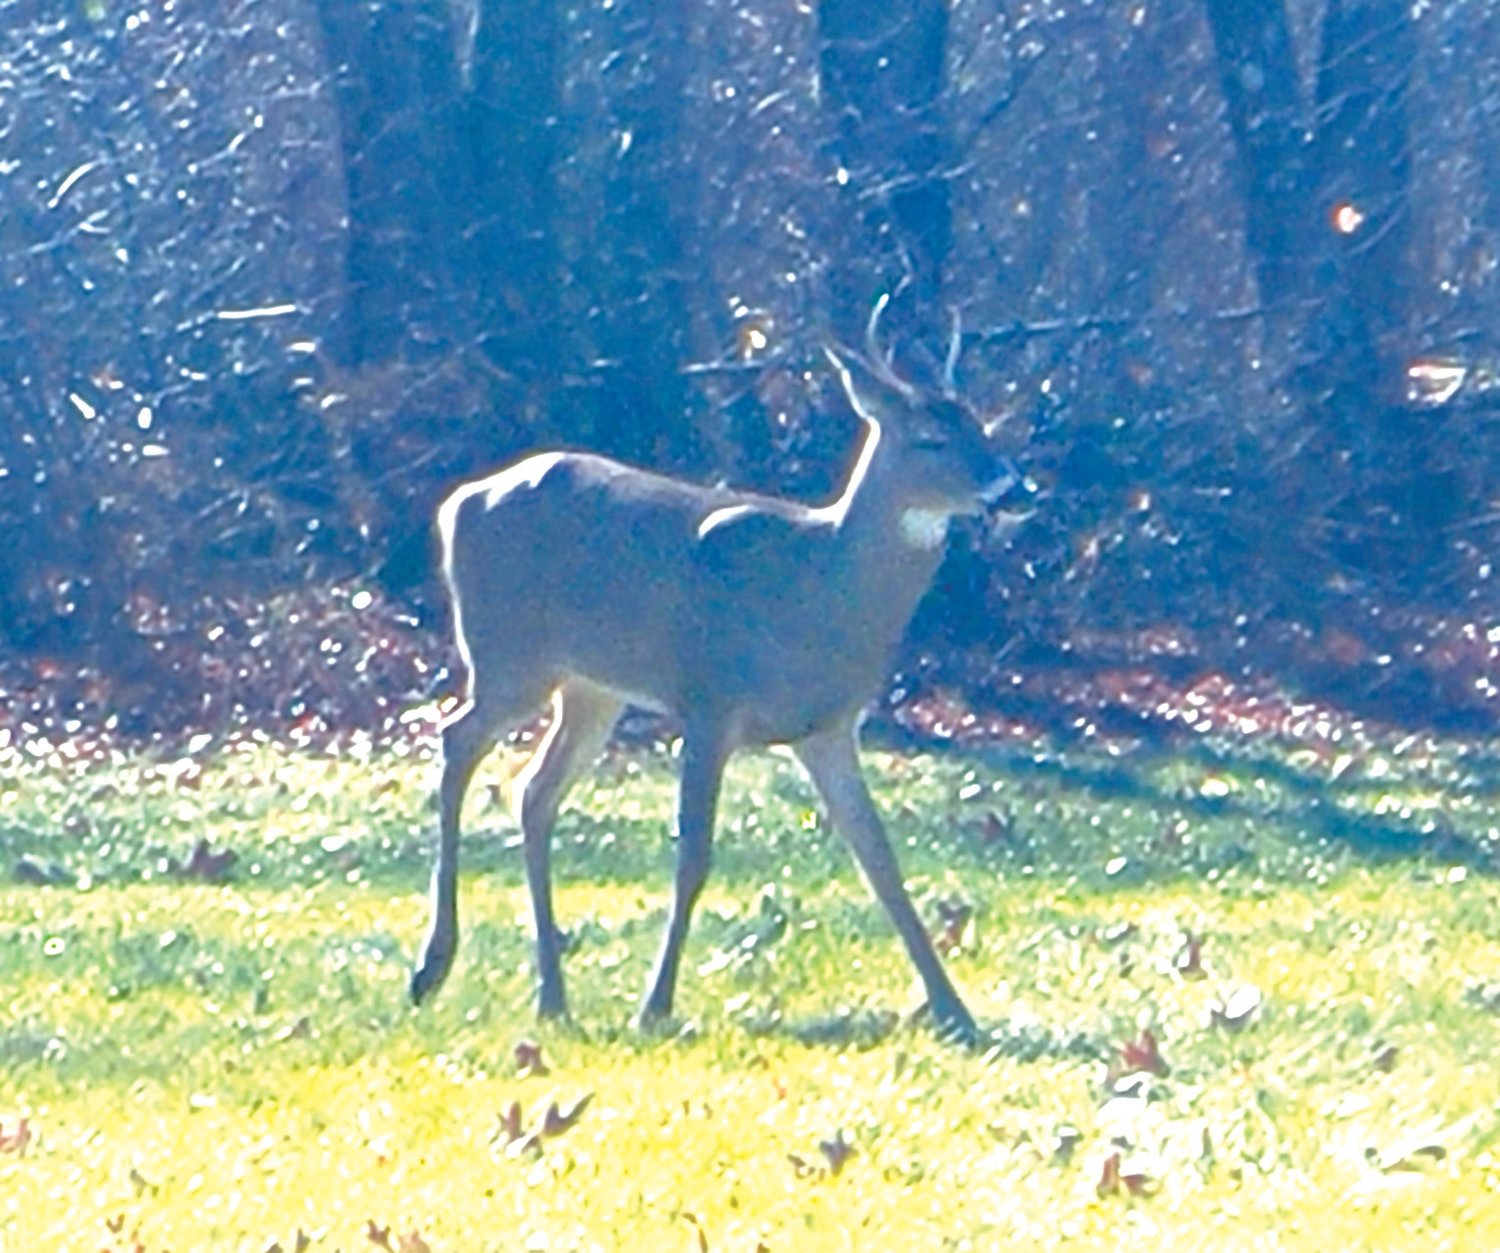 PASS THE BUCK: A young spike buck dared to run the city streets of Warwick and took refuge in the former baseball field near the Vernon Street Playground.